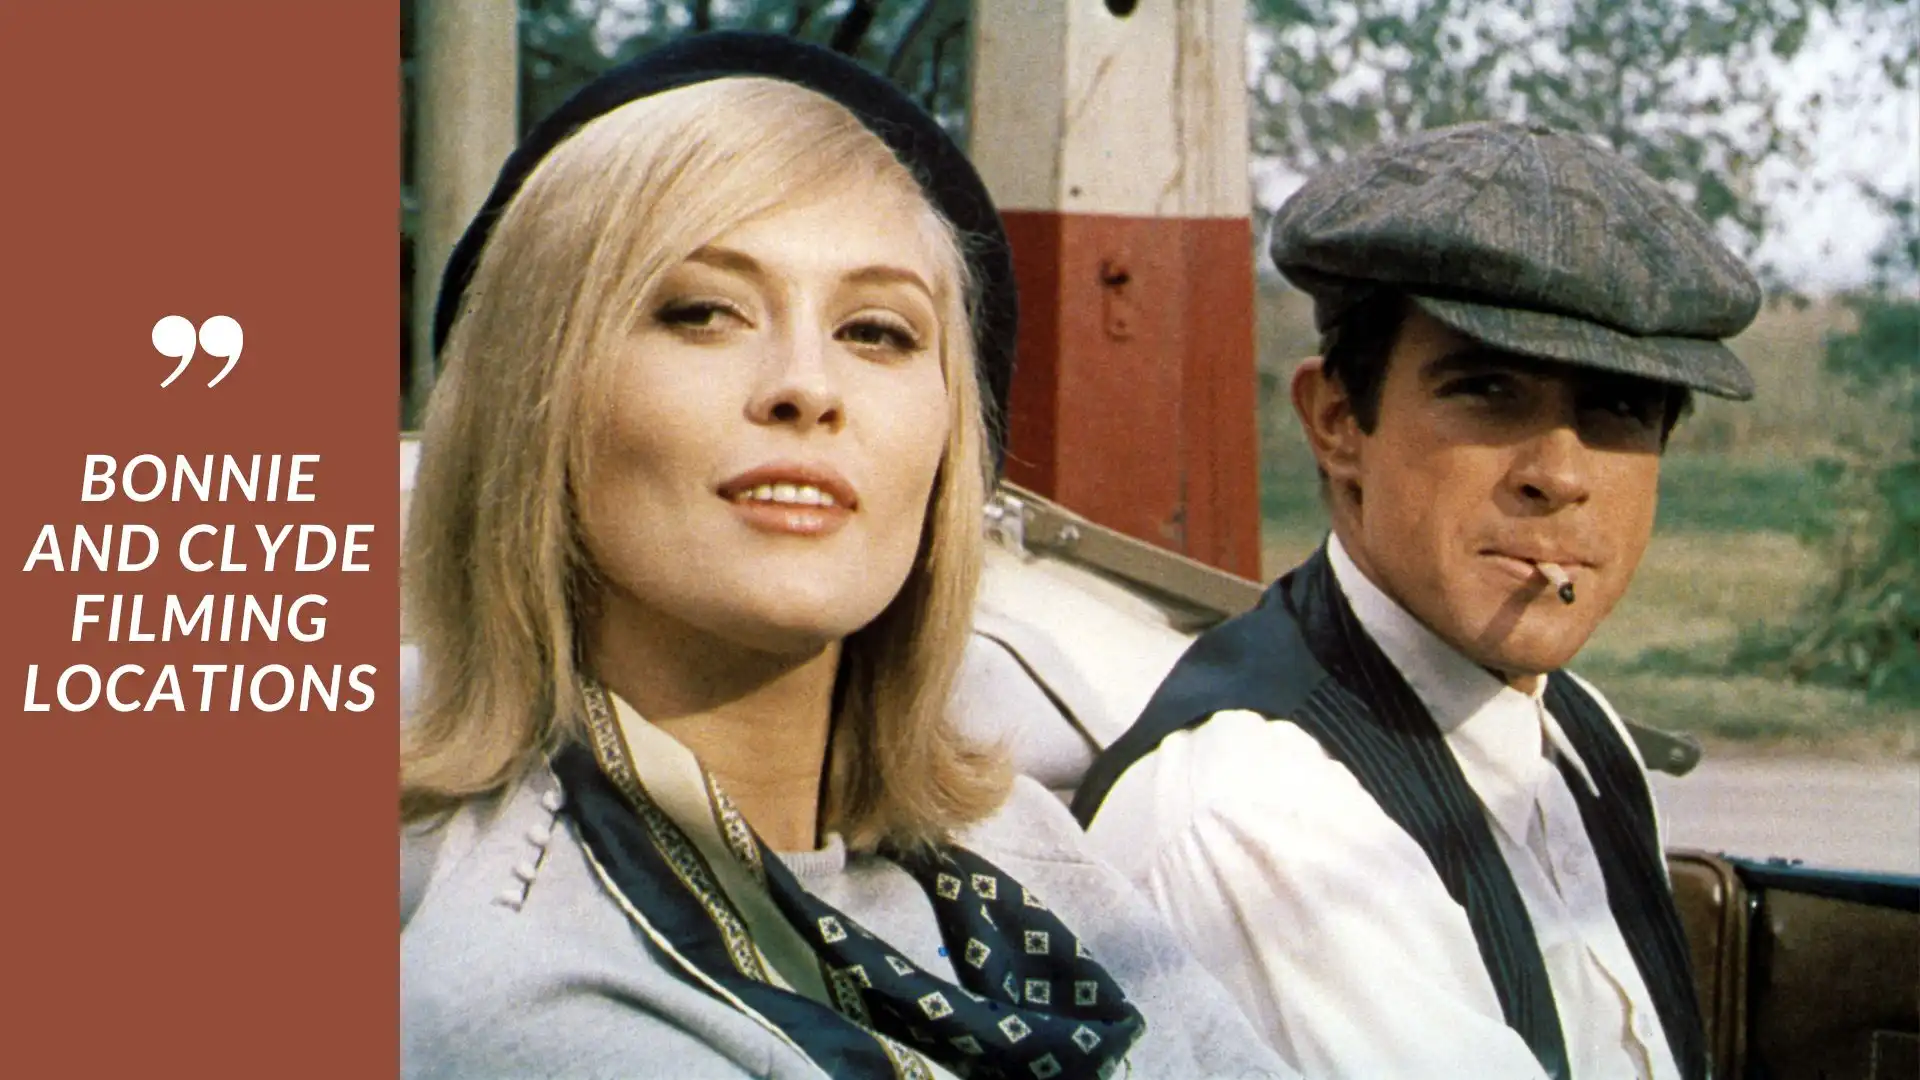 Bonnie and Clyde Filming Locations (Image credit: IMDb)